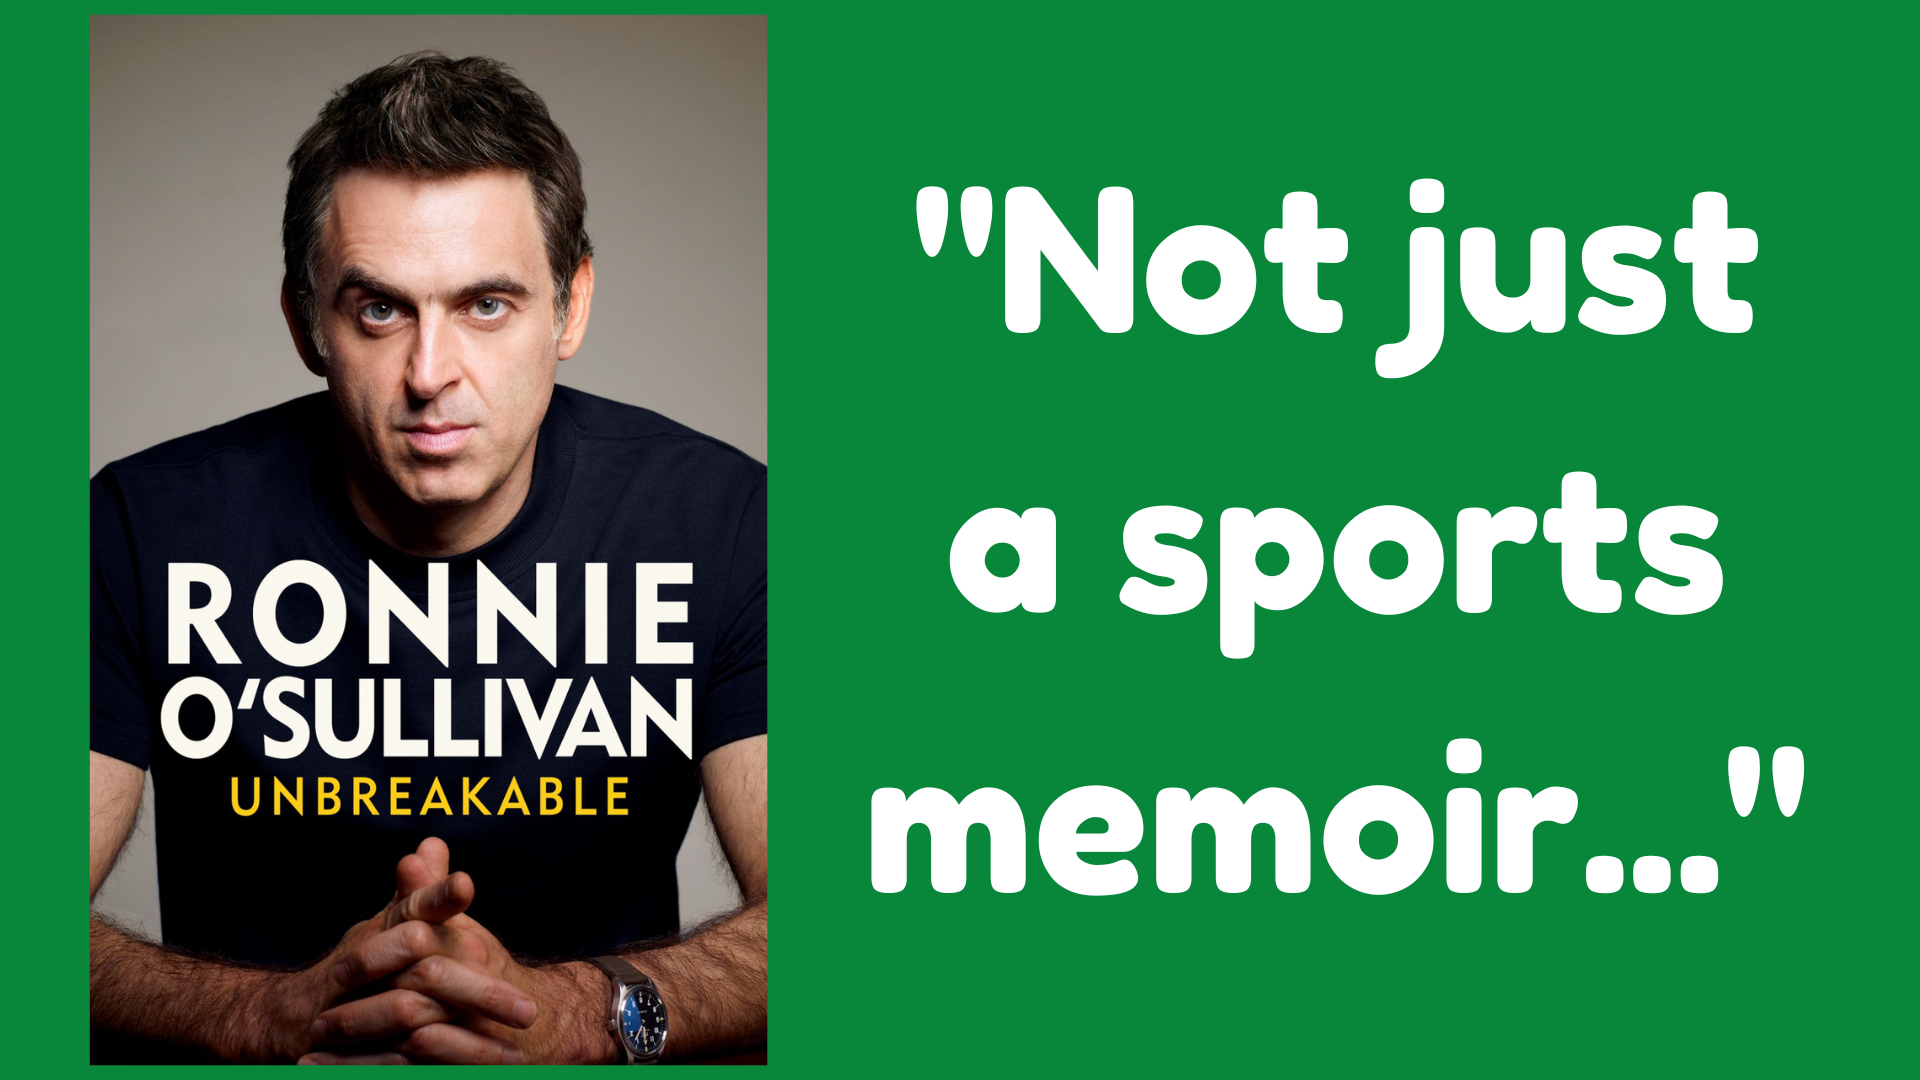 BOOK REVIEW: Unbreakable by Ronnie O’Sullivan